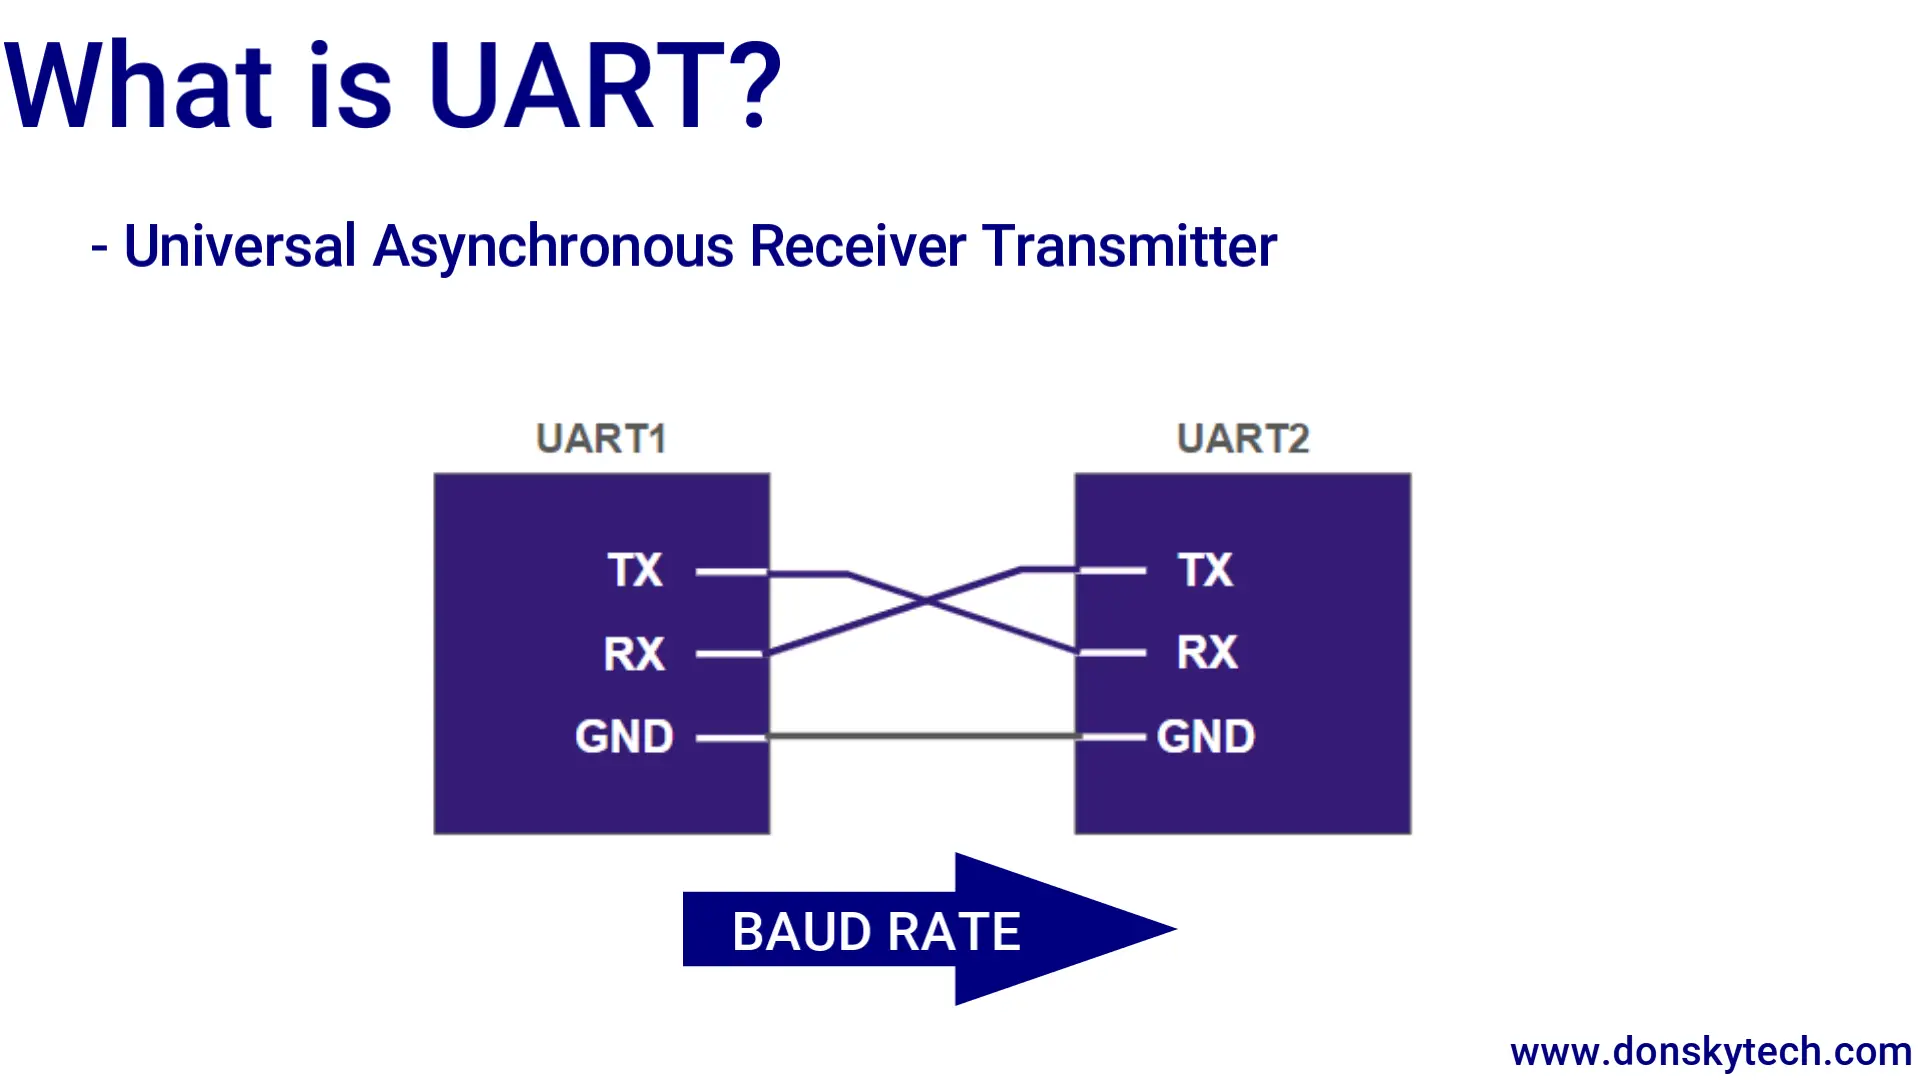 What is UART?